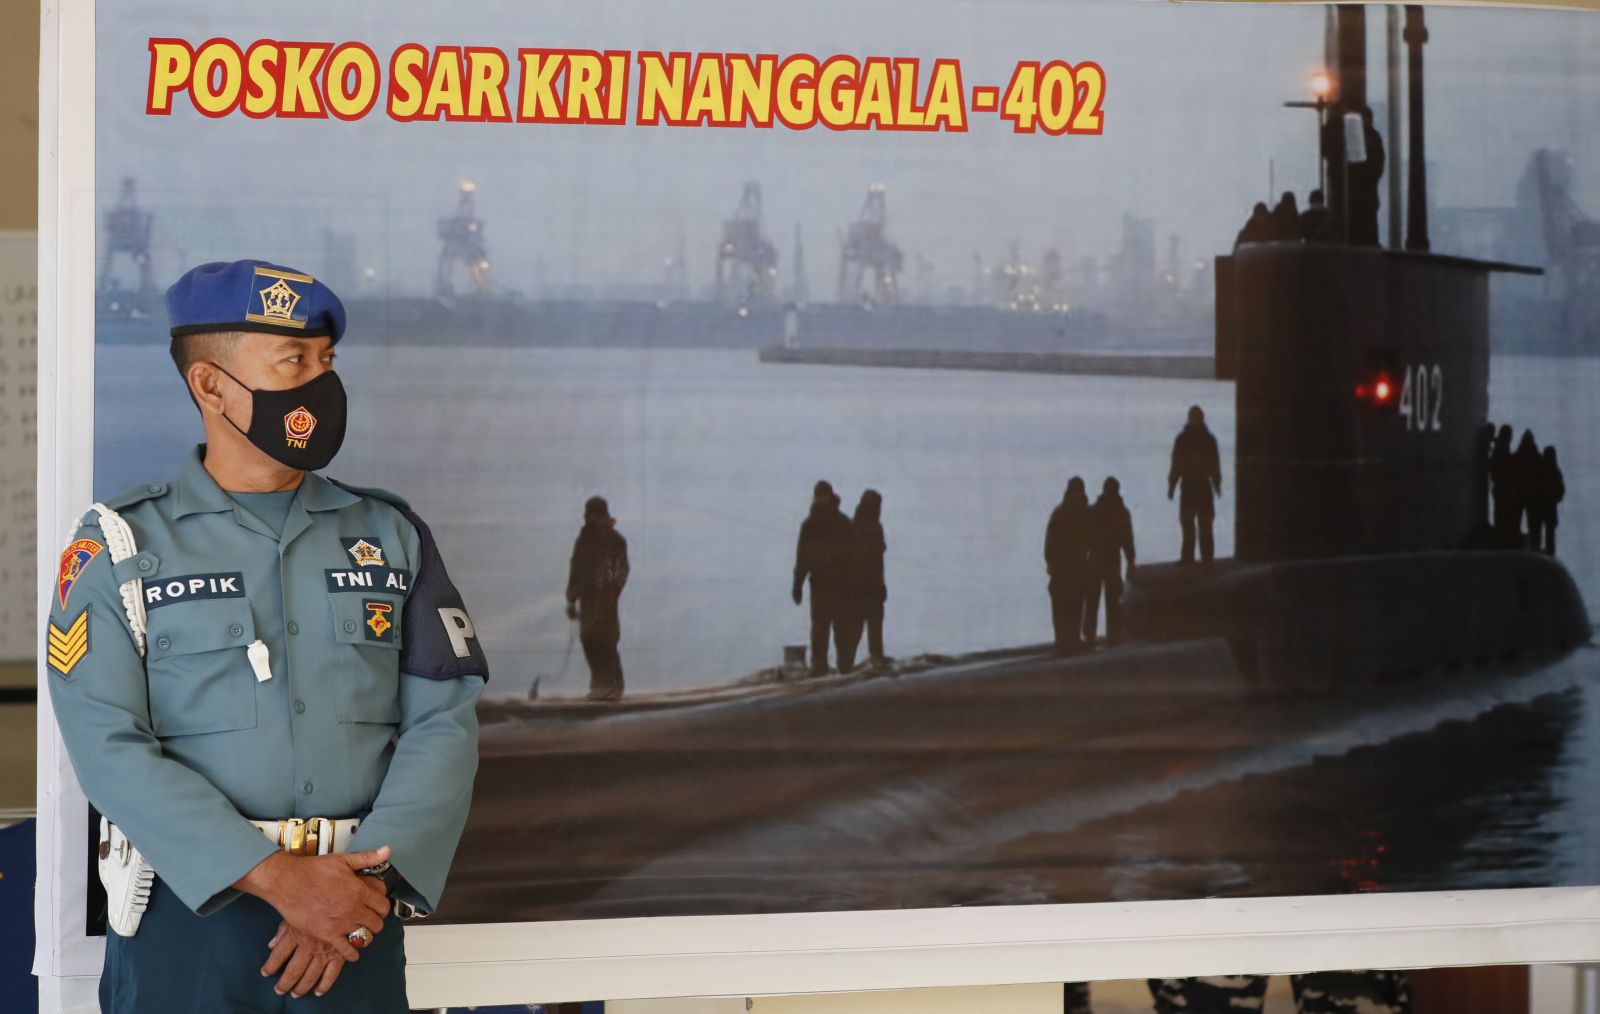 epa09154443 A military officer stands in front a search and rescue command for the missing Indonesian Navy submarine KRI Nanggala, at Ngurah Rai Airport in Bali, Indonesia, 23 April 2021. The German-made submarine was reported missing on 21 April 2021 near the island of Bali with 53 people on board while preparing to conduct a torpedo drill, the the Indonesian National Armed Forces said.  EPA/MADE NAGI